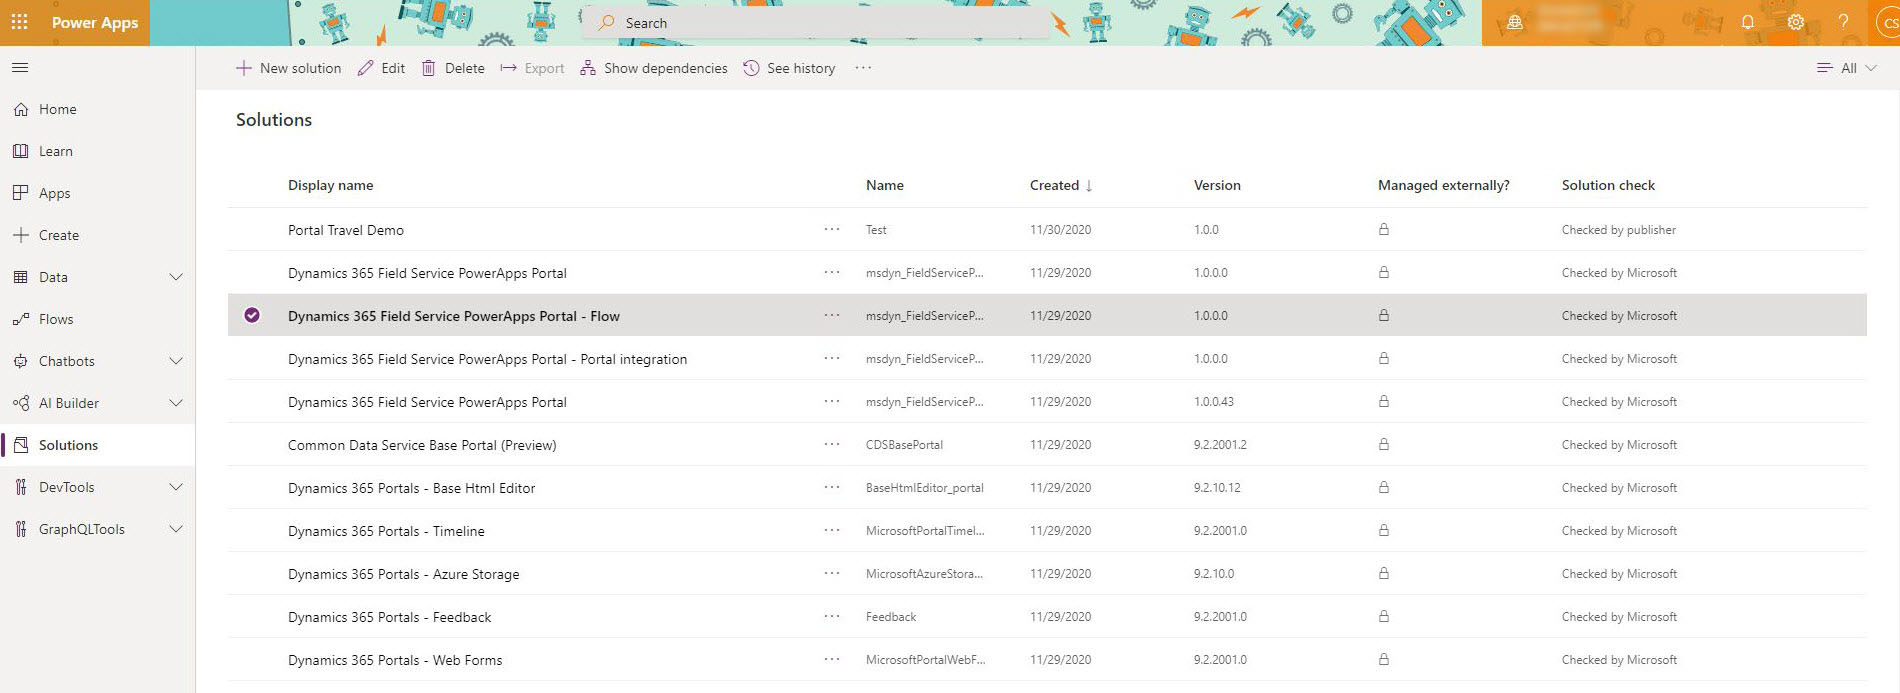 Screenshot of of Power Apps showing the list of solutions with "Dynamics 365 Field Service PowerApps Portal – Flow" selected.